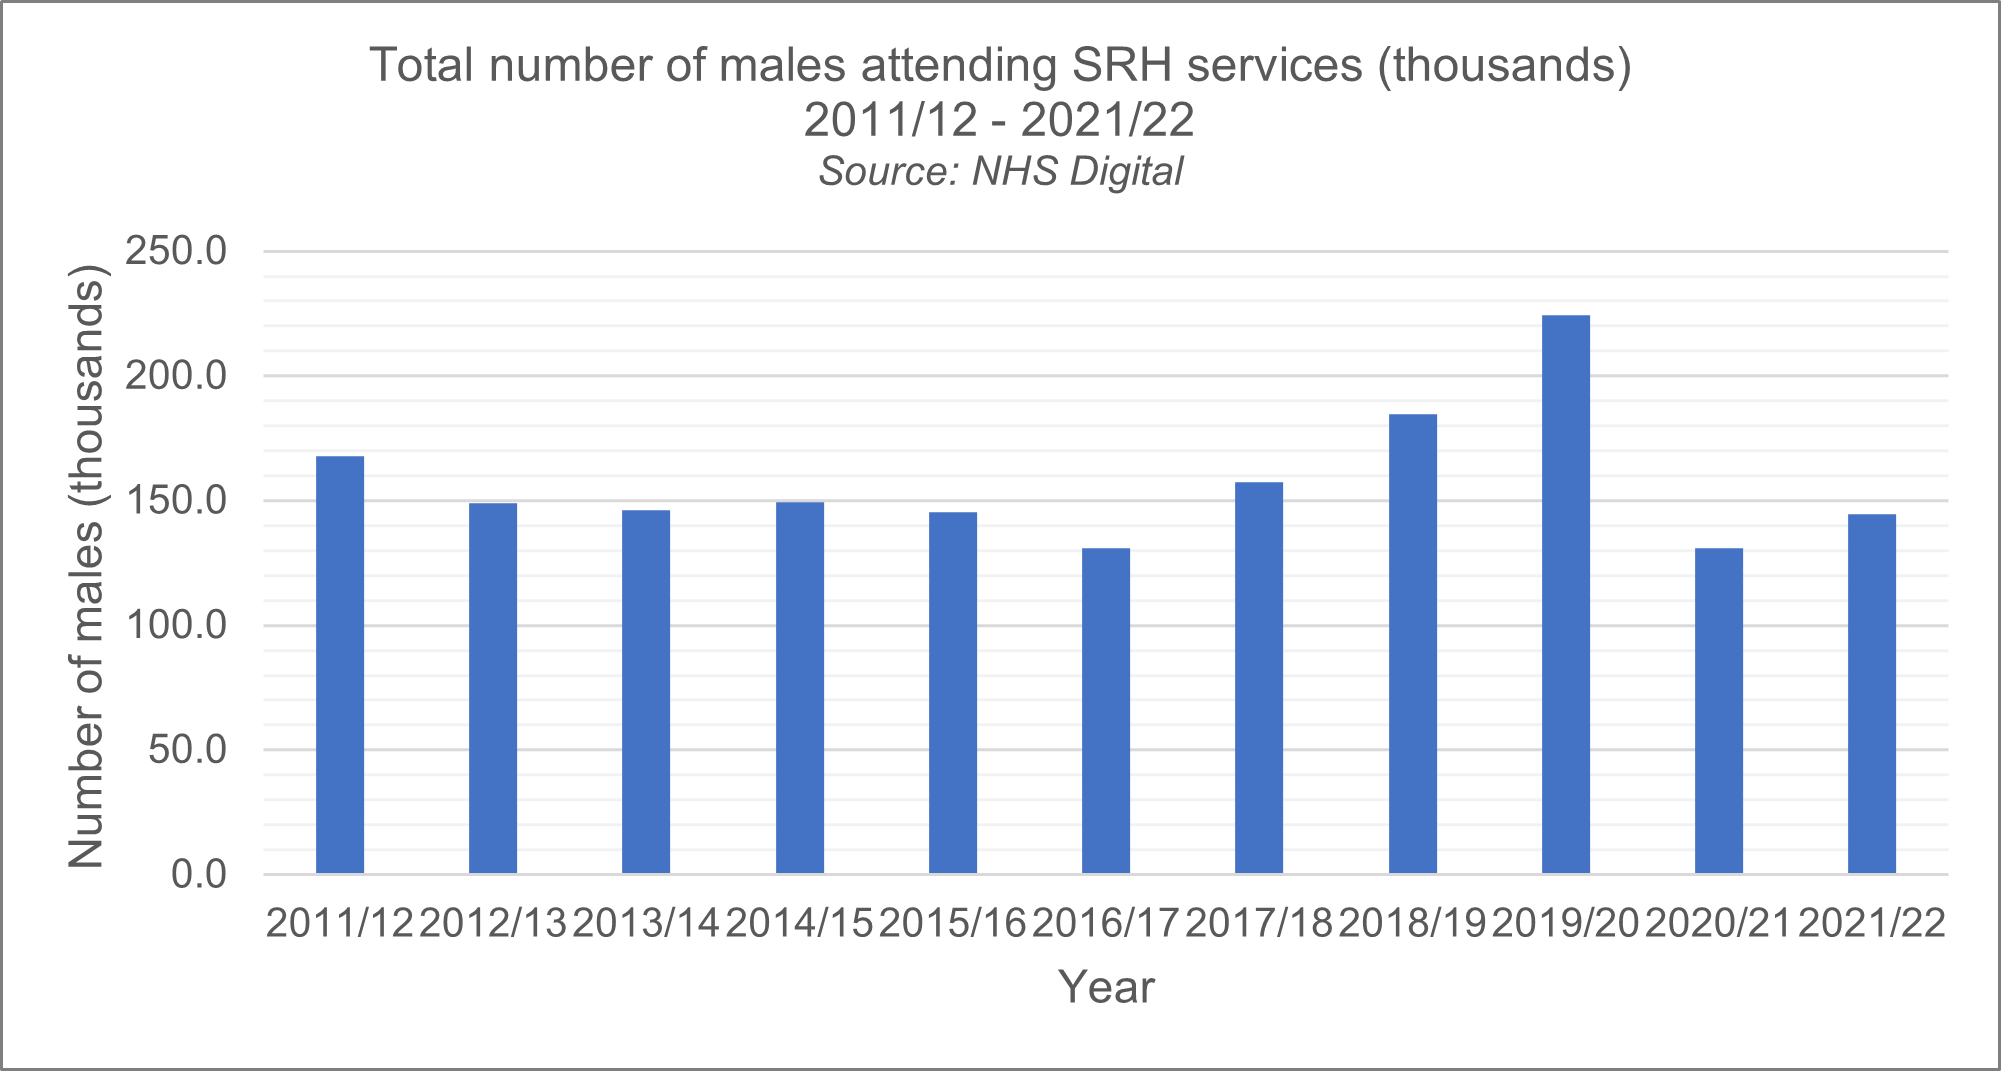 In 2011/12, approximately 167,900 males attended sexual health services, increasing to 224,200 in 2019/20. This decreased to 144,600 in 2021/22. 